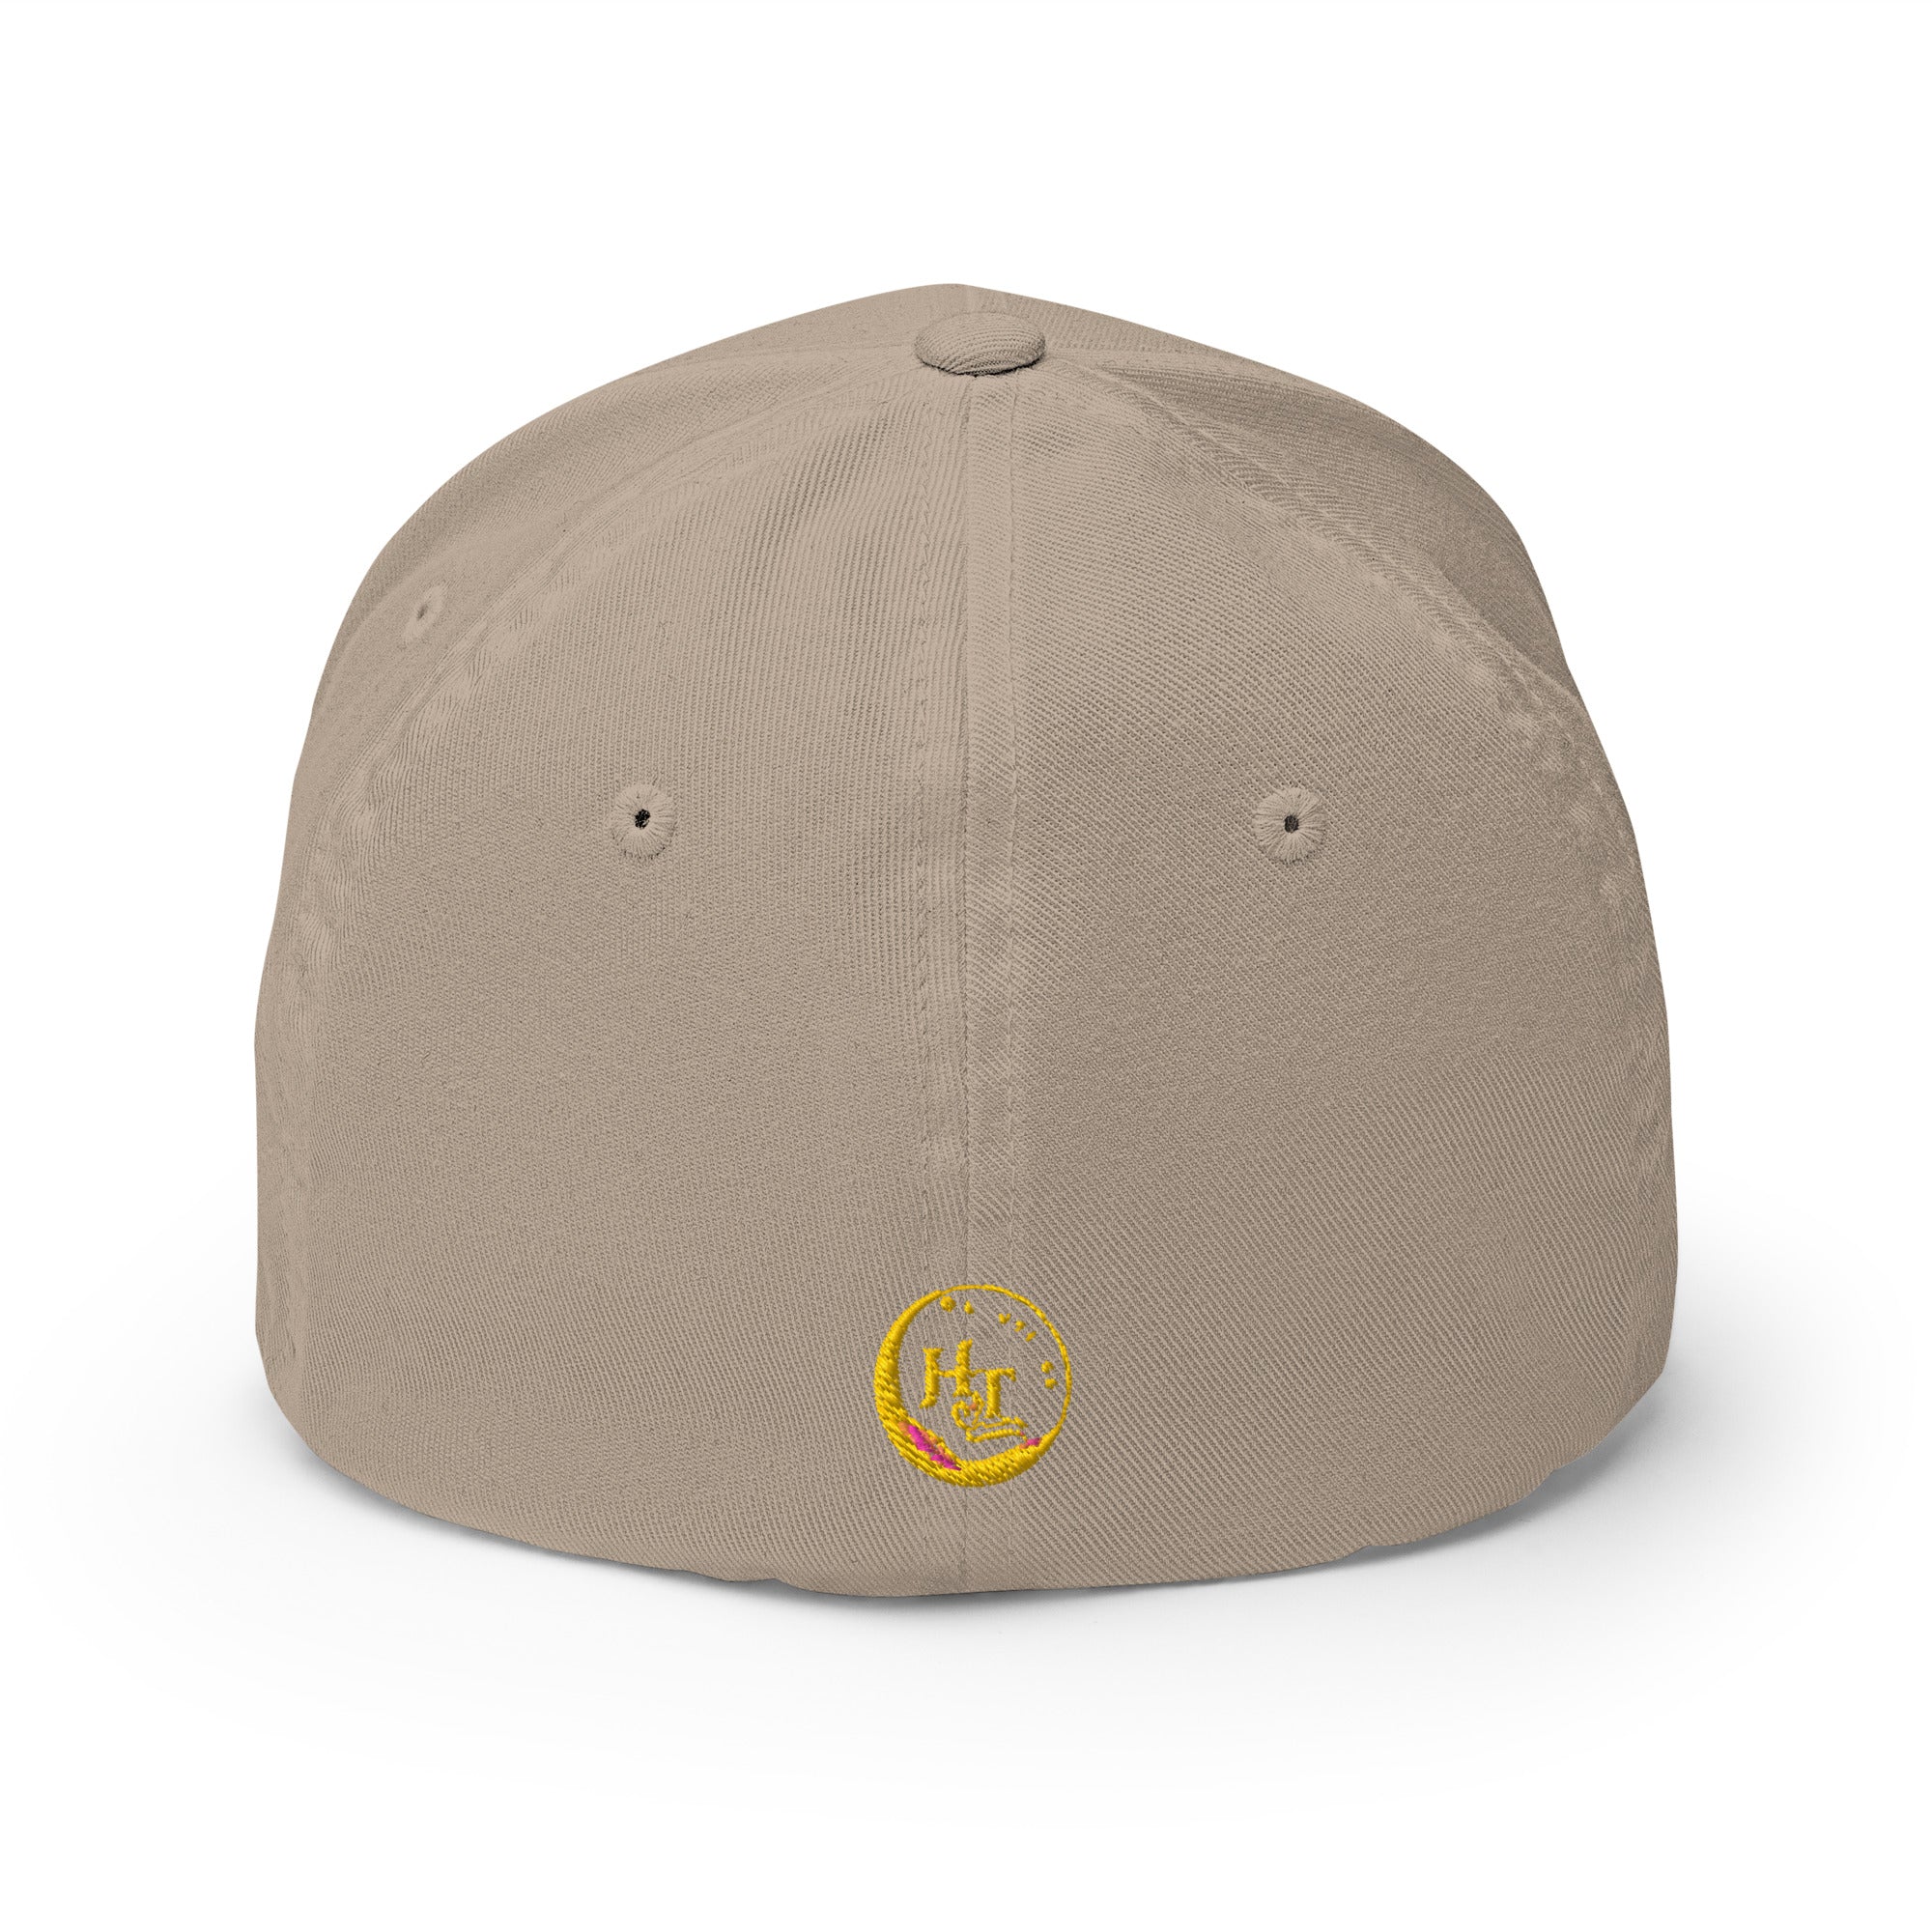 Choose Peace Structured Twill Cap